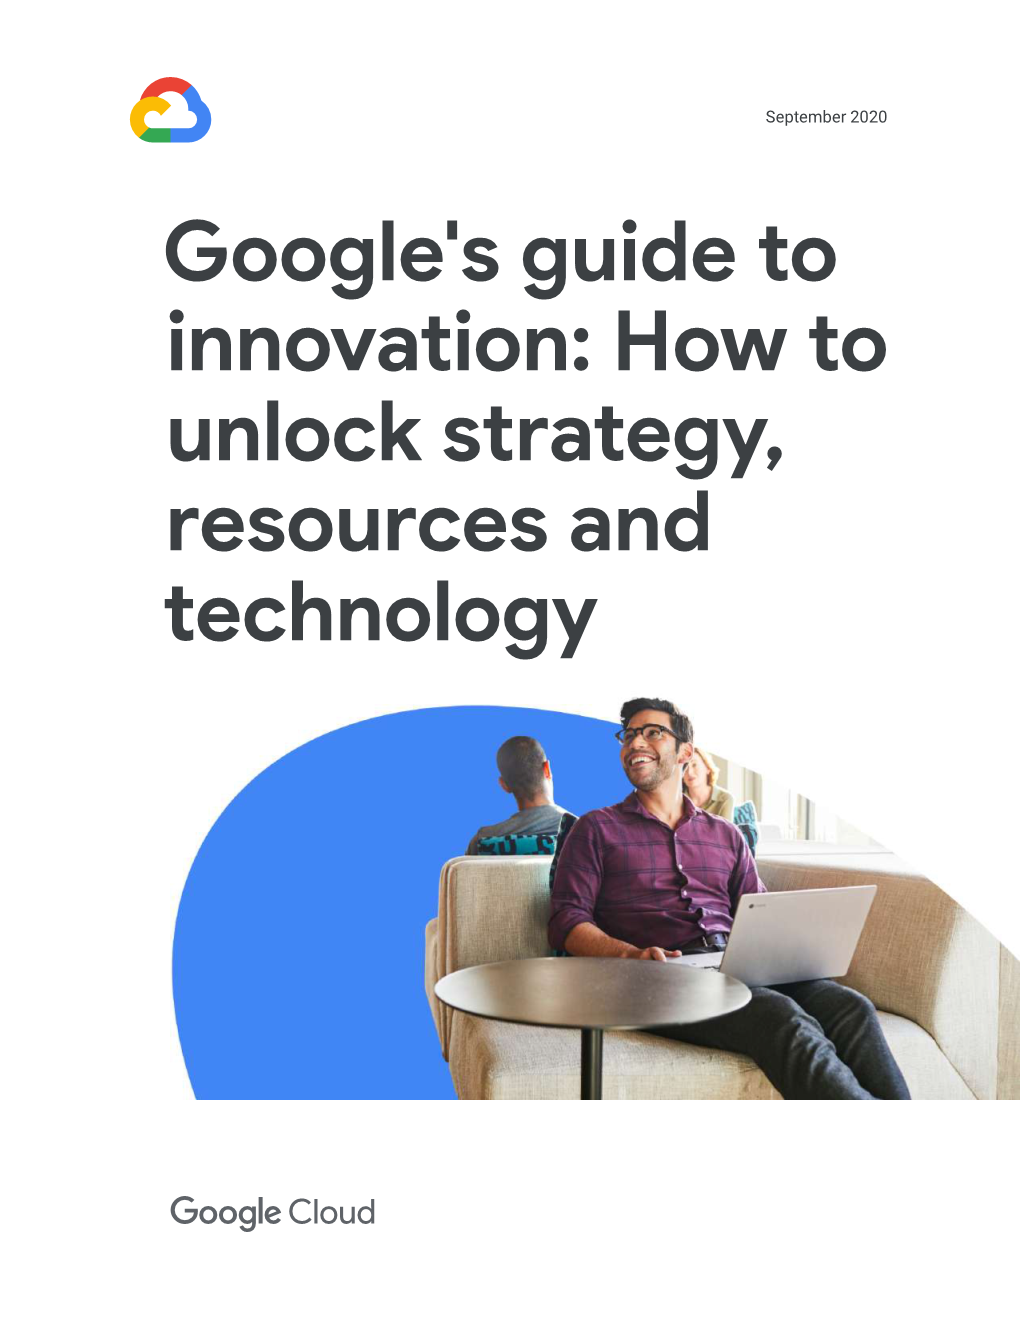 Google's Guide to Innovation: How to Unlock Strategy, Resources and Technology I